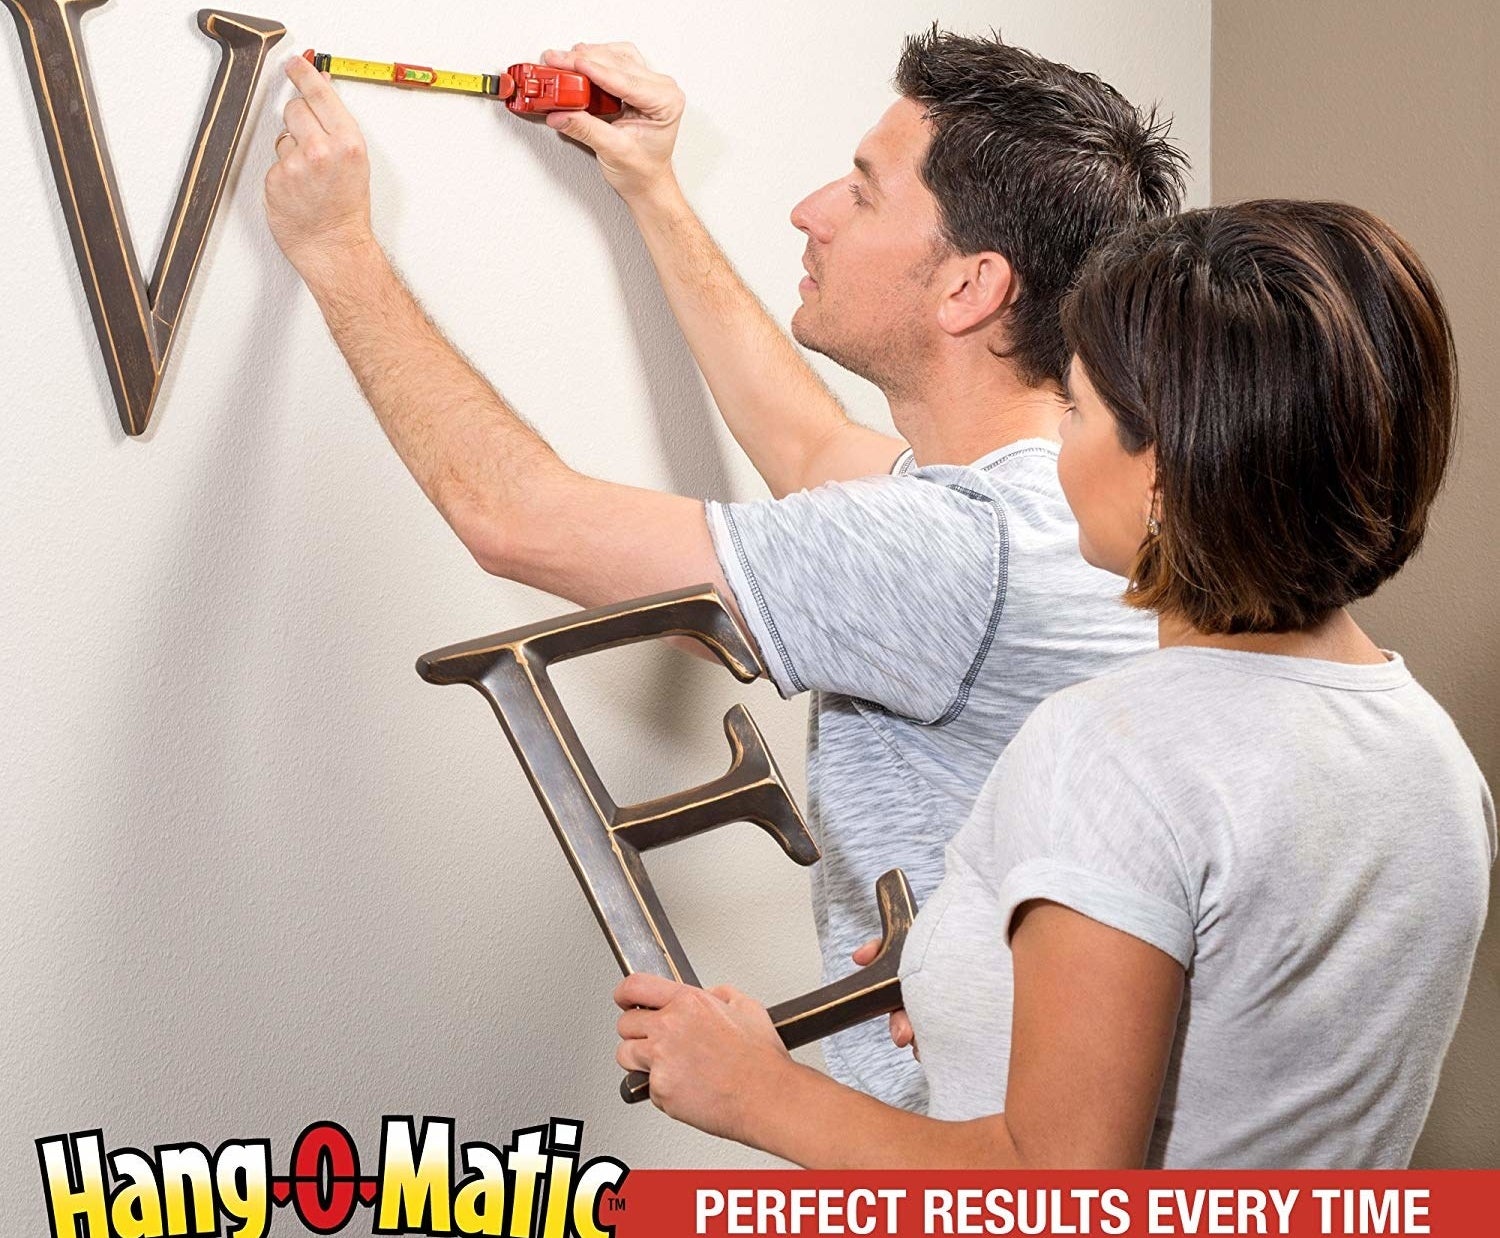 A person using the tool to hang a piece of wall art